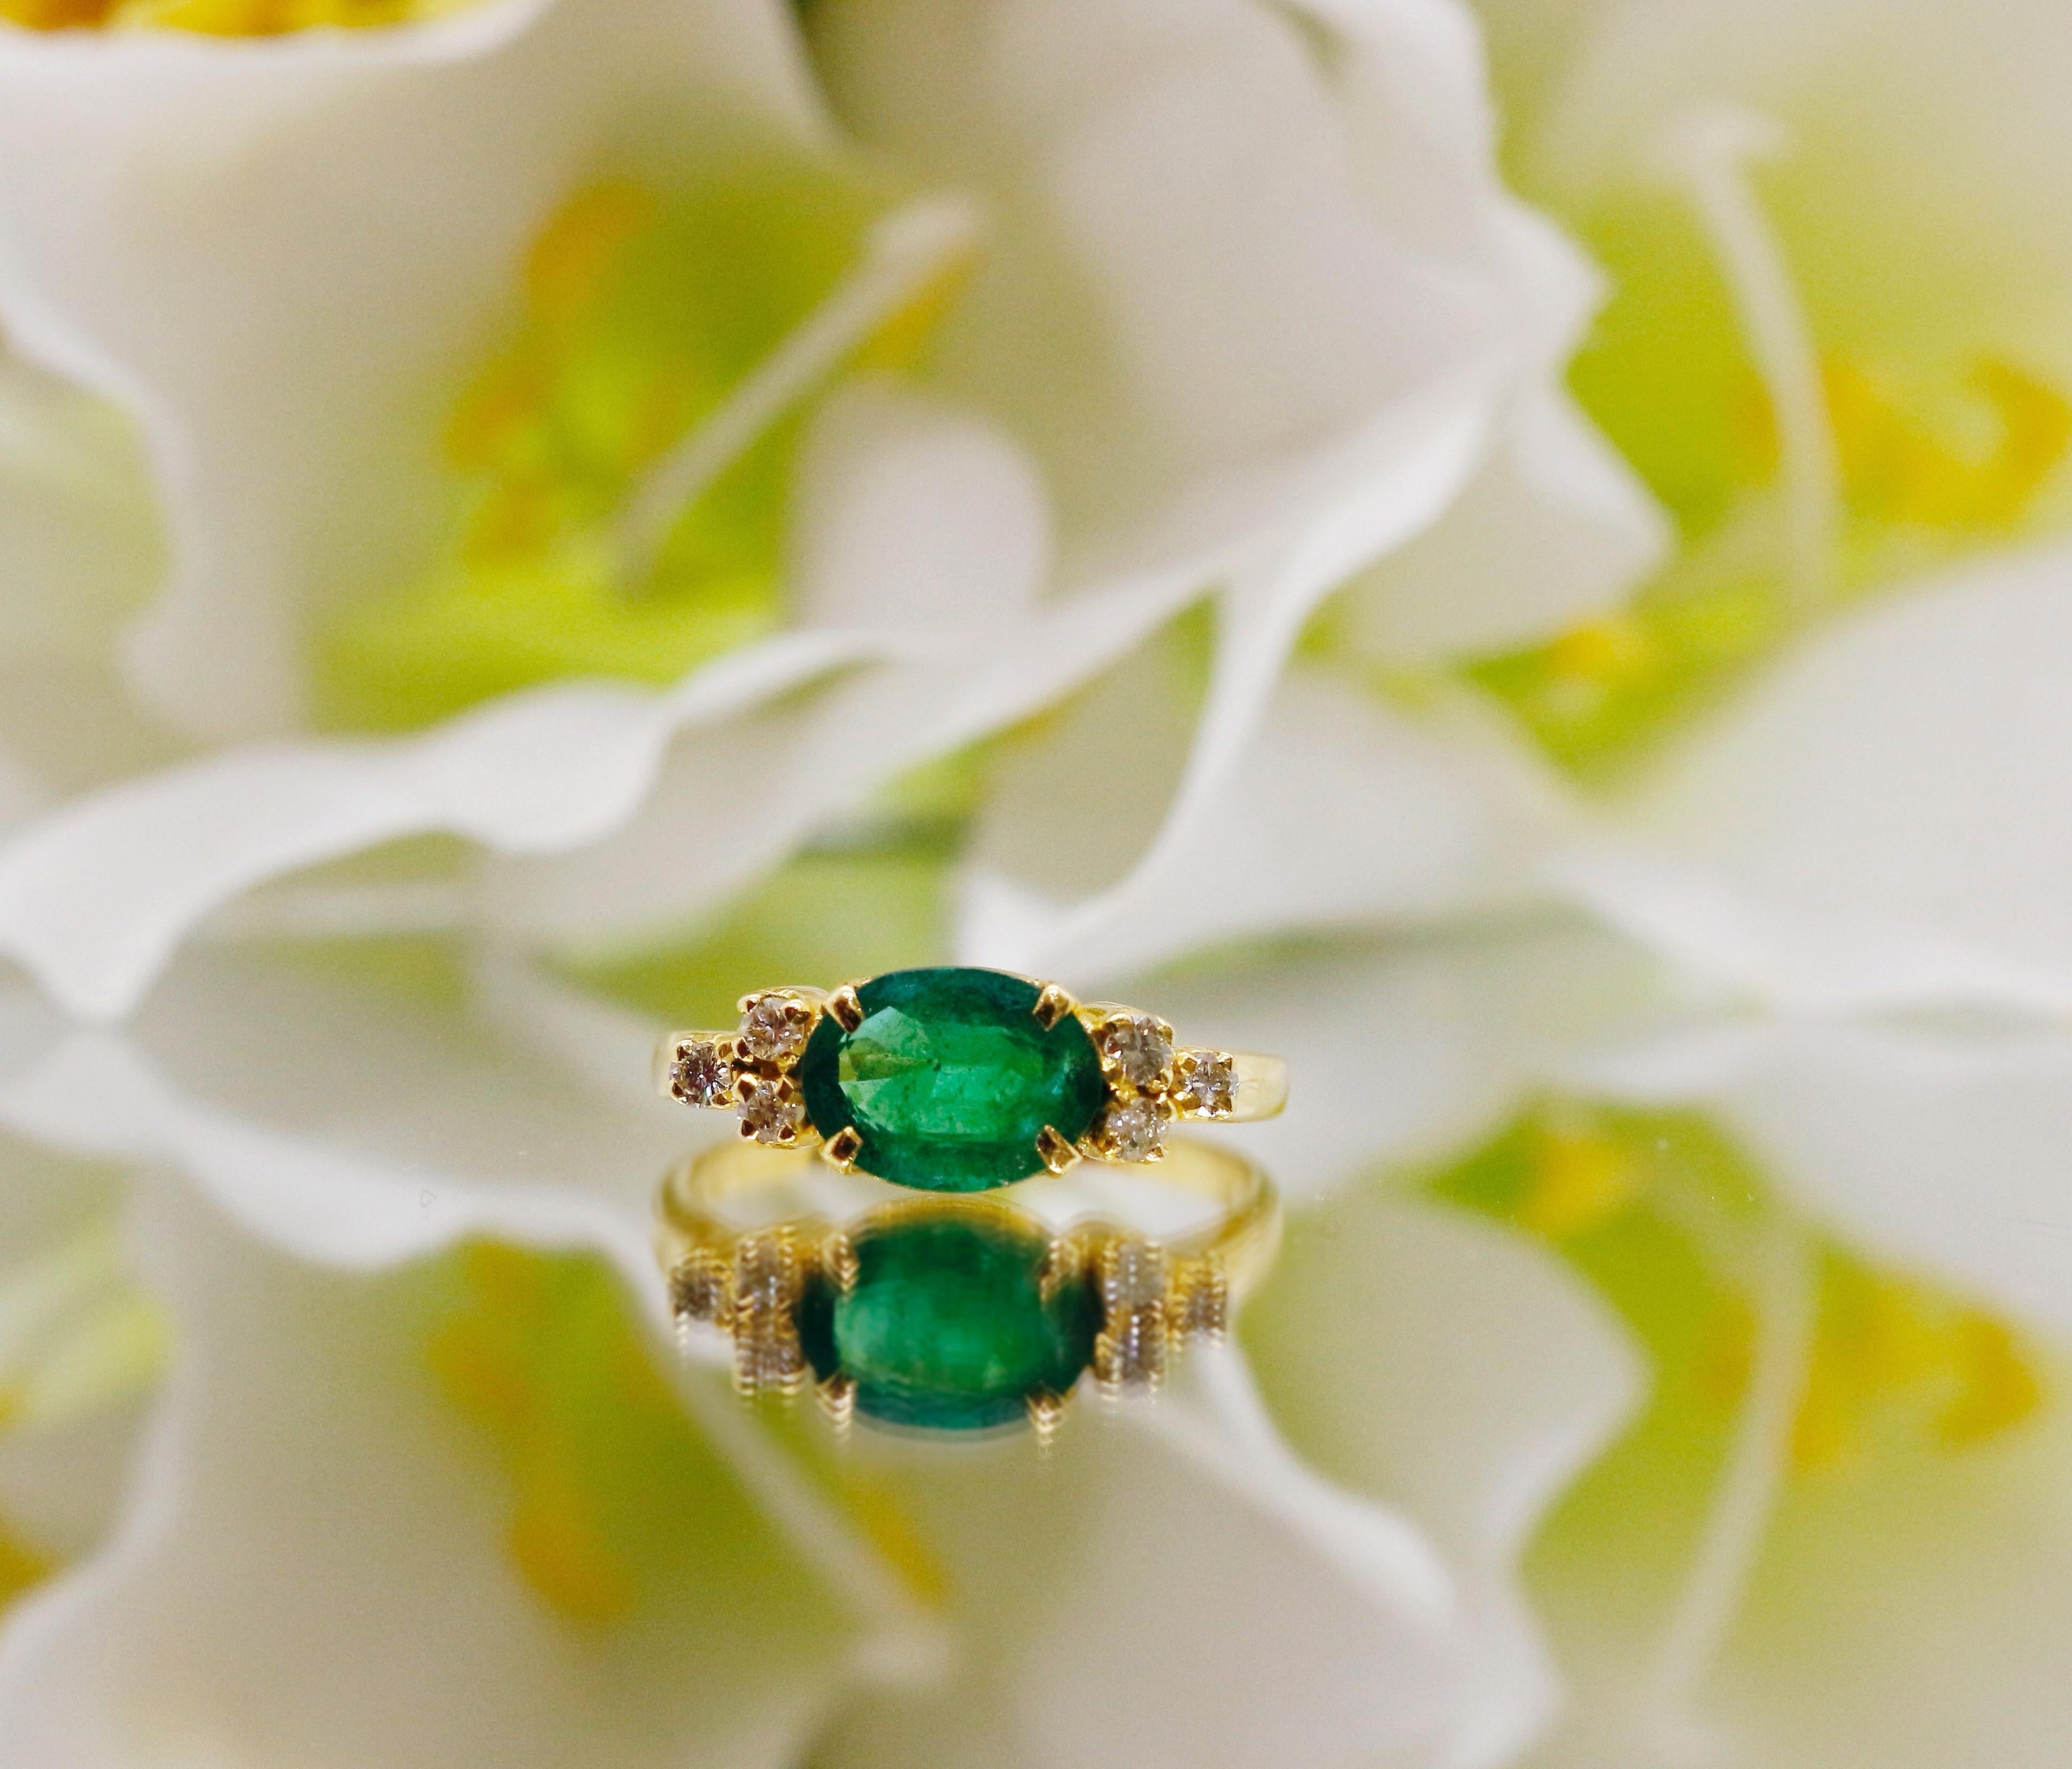 ◆Detail description◆

◆Solid 18k Gold(shown in picture)

◆Natural Emerald Weight: 1.25 CT

◆Diamond Carat: 0.10 CT

◆Diamond Shape: Round princess

◆Total Weight: 3.2 Gram